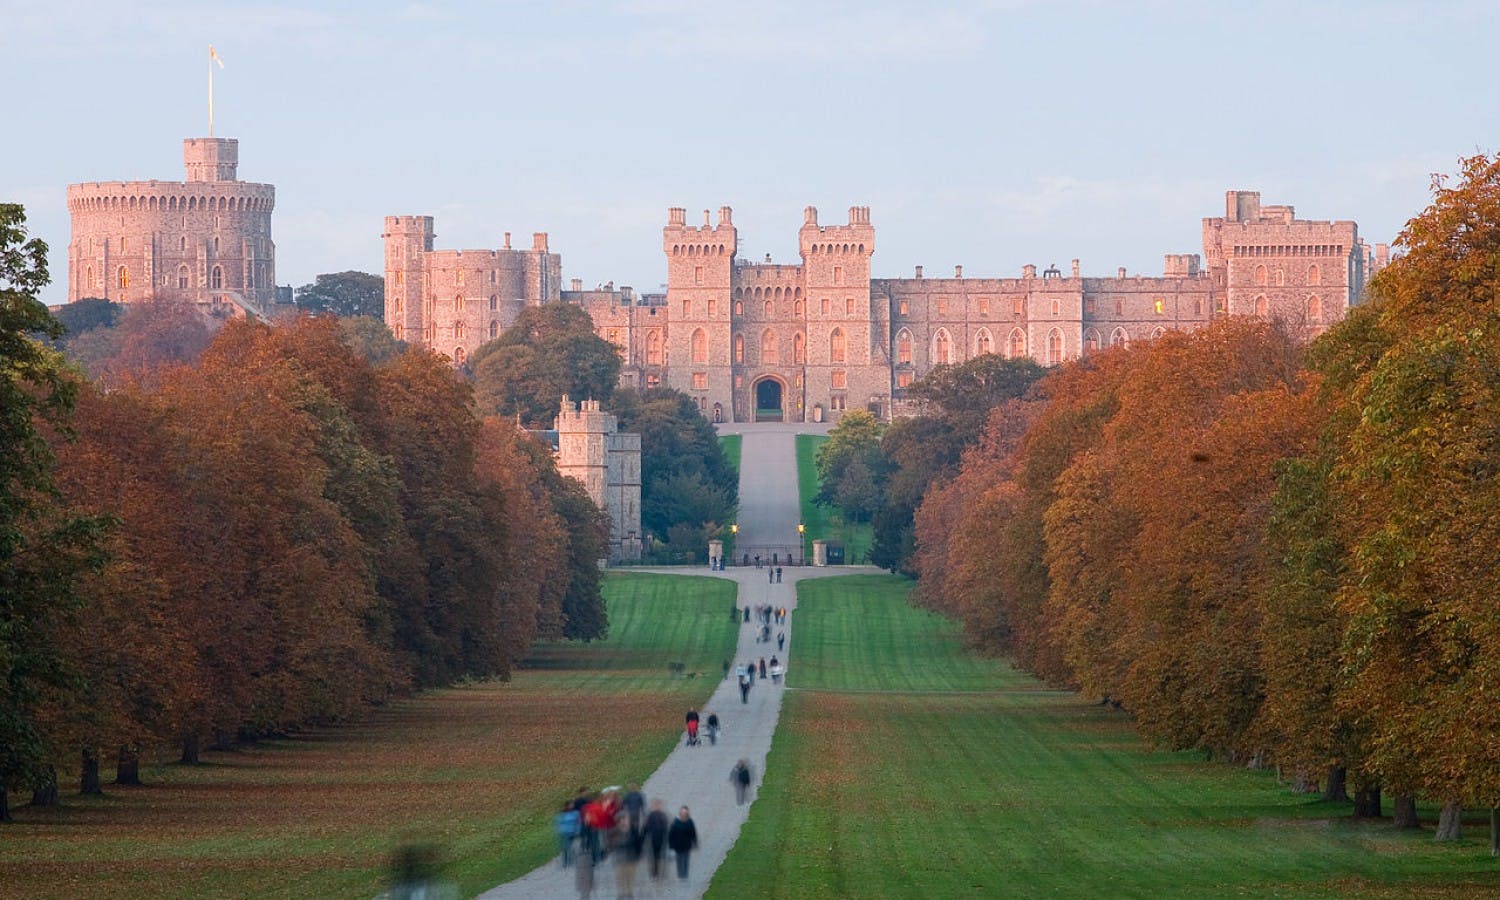 Stonehenge, Oxford, & Windsor Castle Guided Tour with Tickets